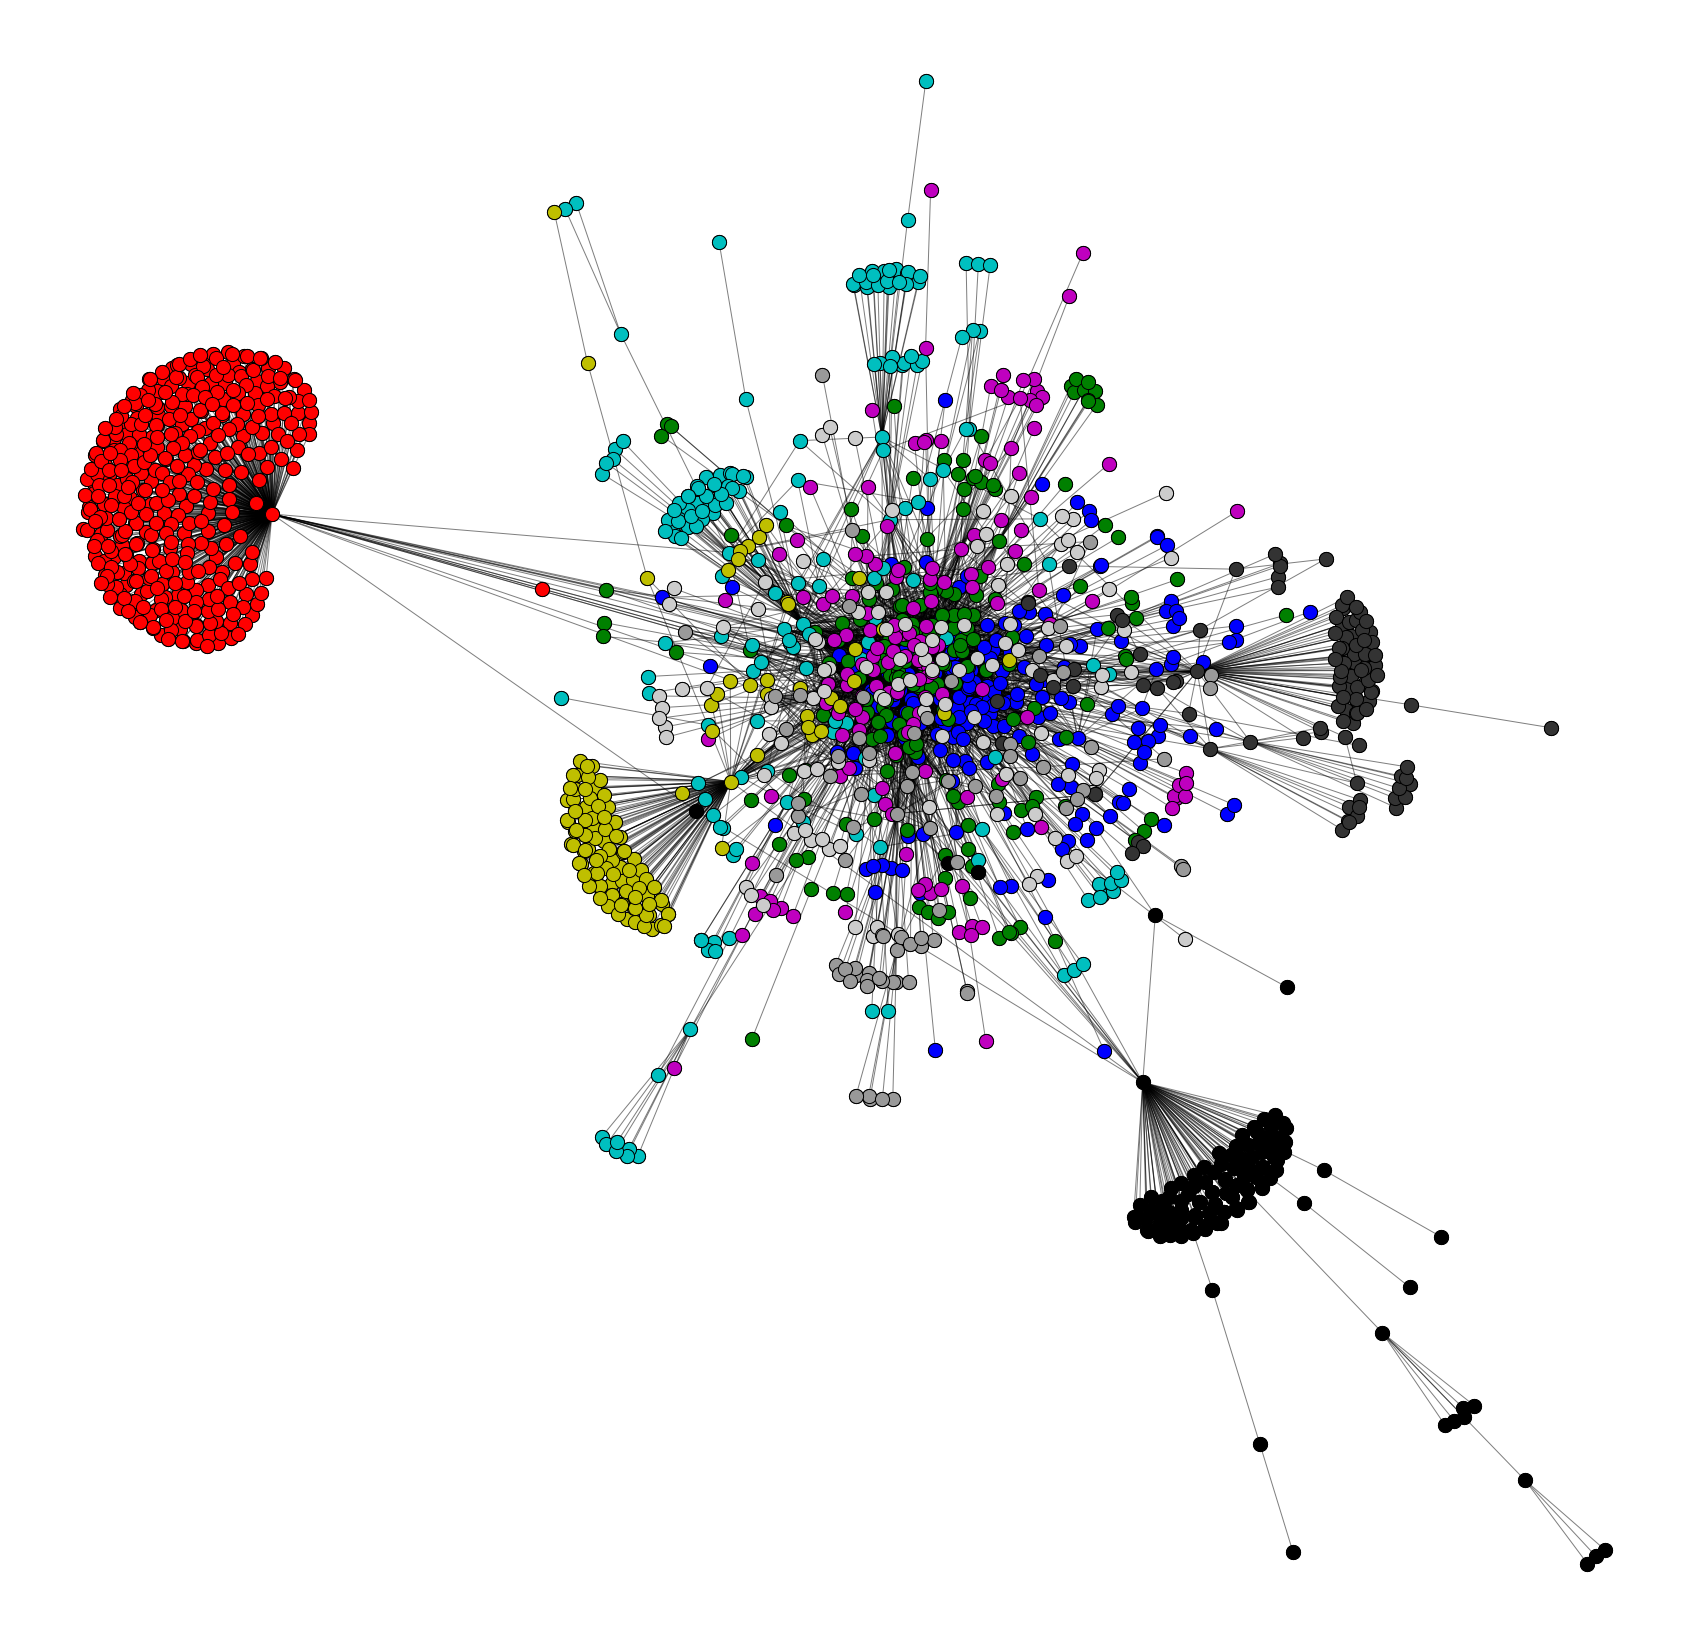 Here is a zoom-in on the nucleus, color-coded by each community using the Leiden Community Detection method. From this and the plot above, we can see there are quite a few communities but almost all the winners sit in the very middle.